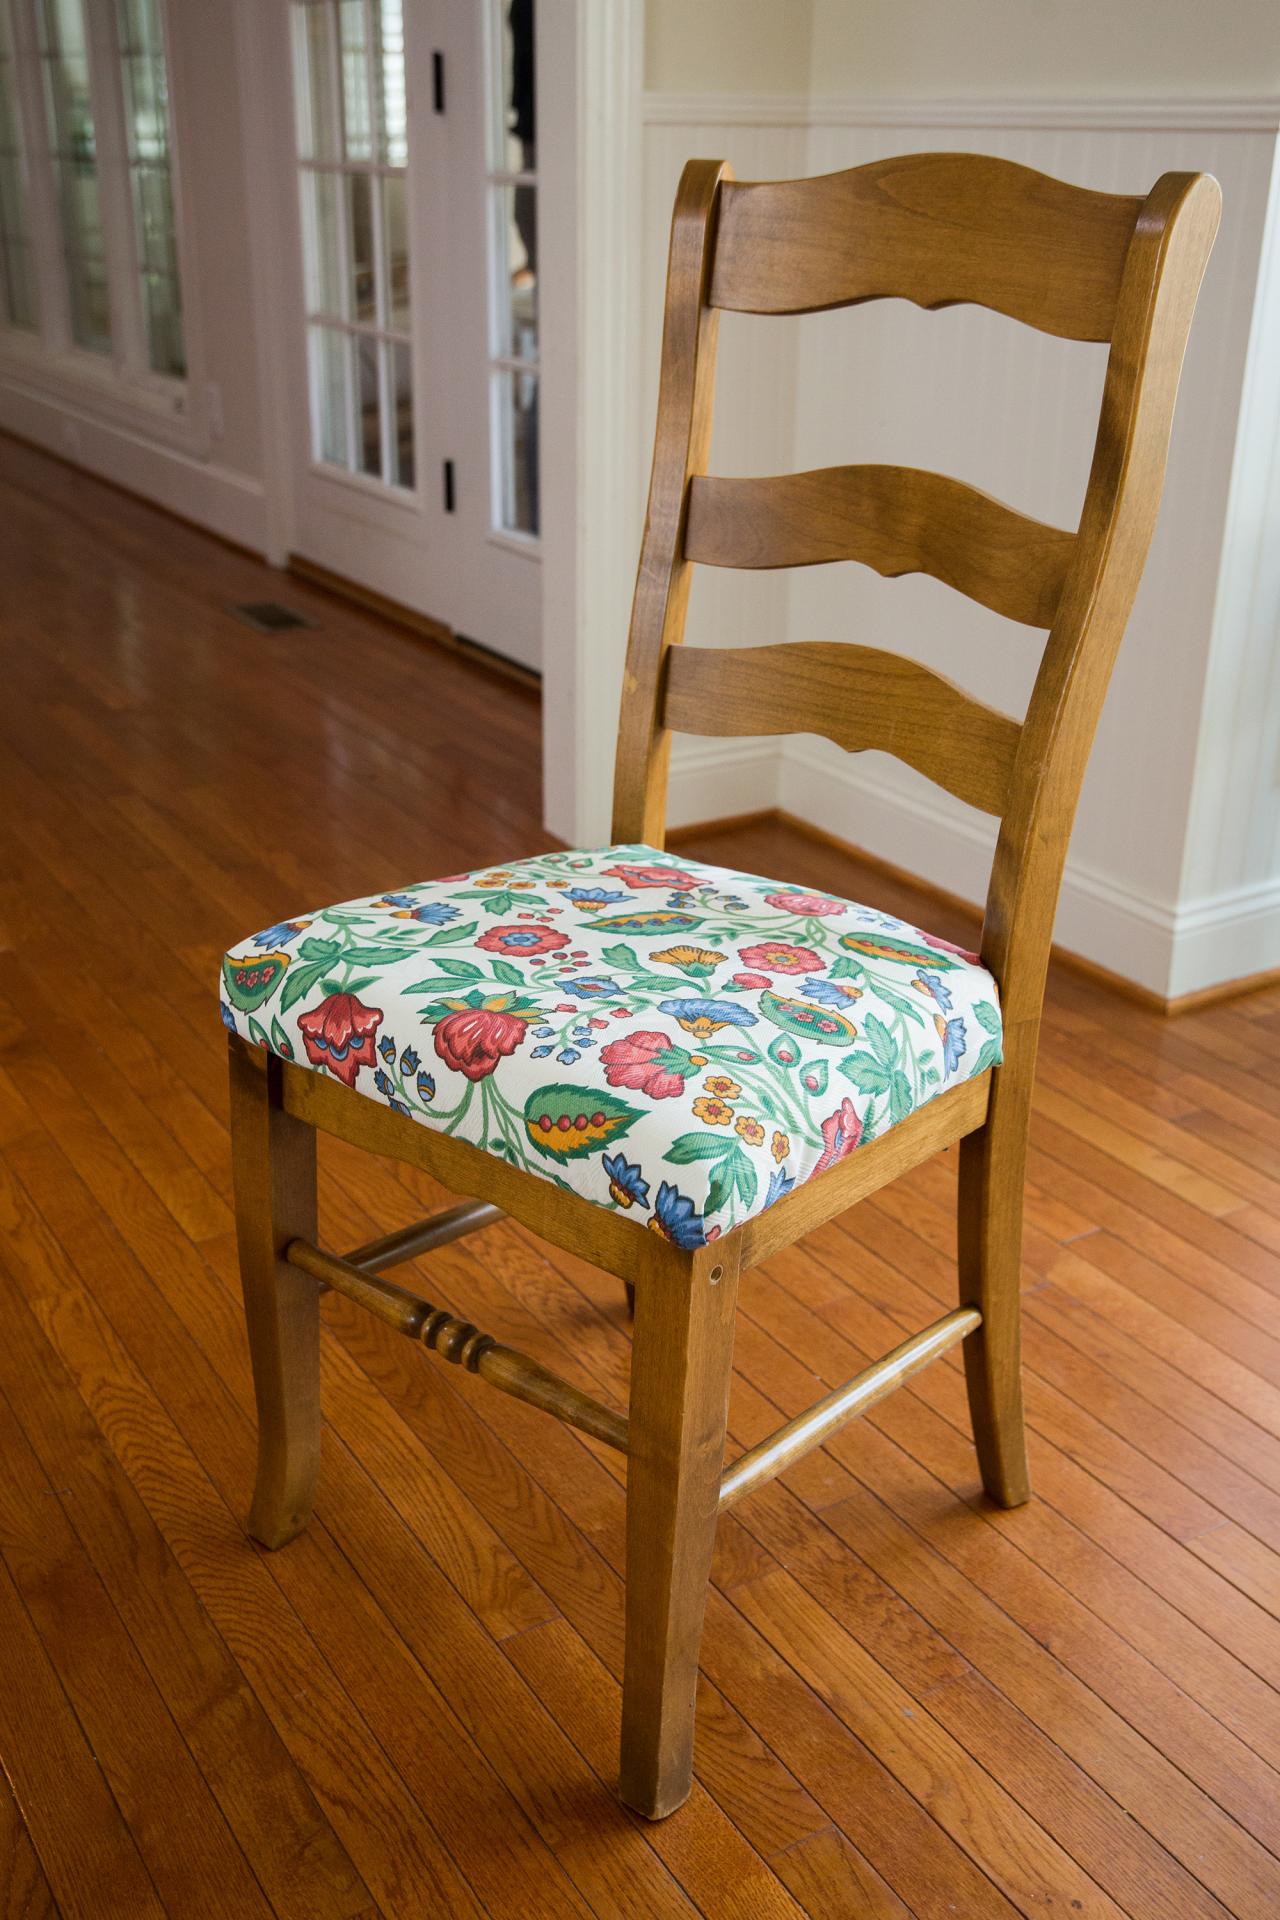 How To Re Cover A Dining Room Chair, Replacement Dining Room Chair Seat Cushions